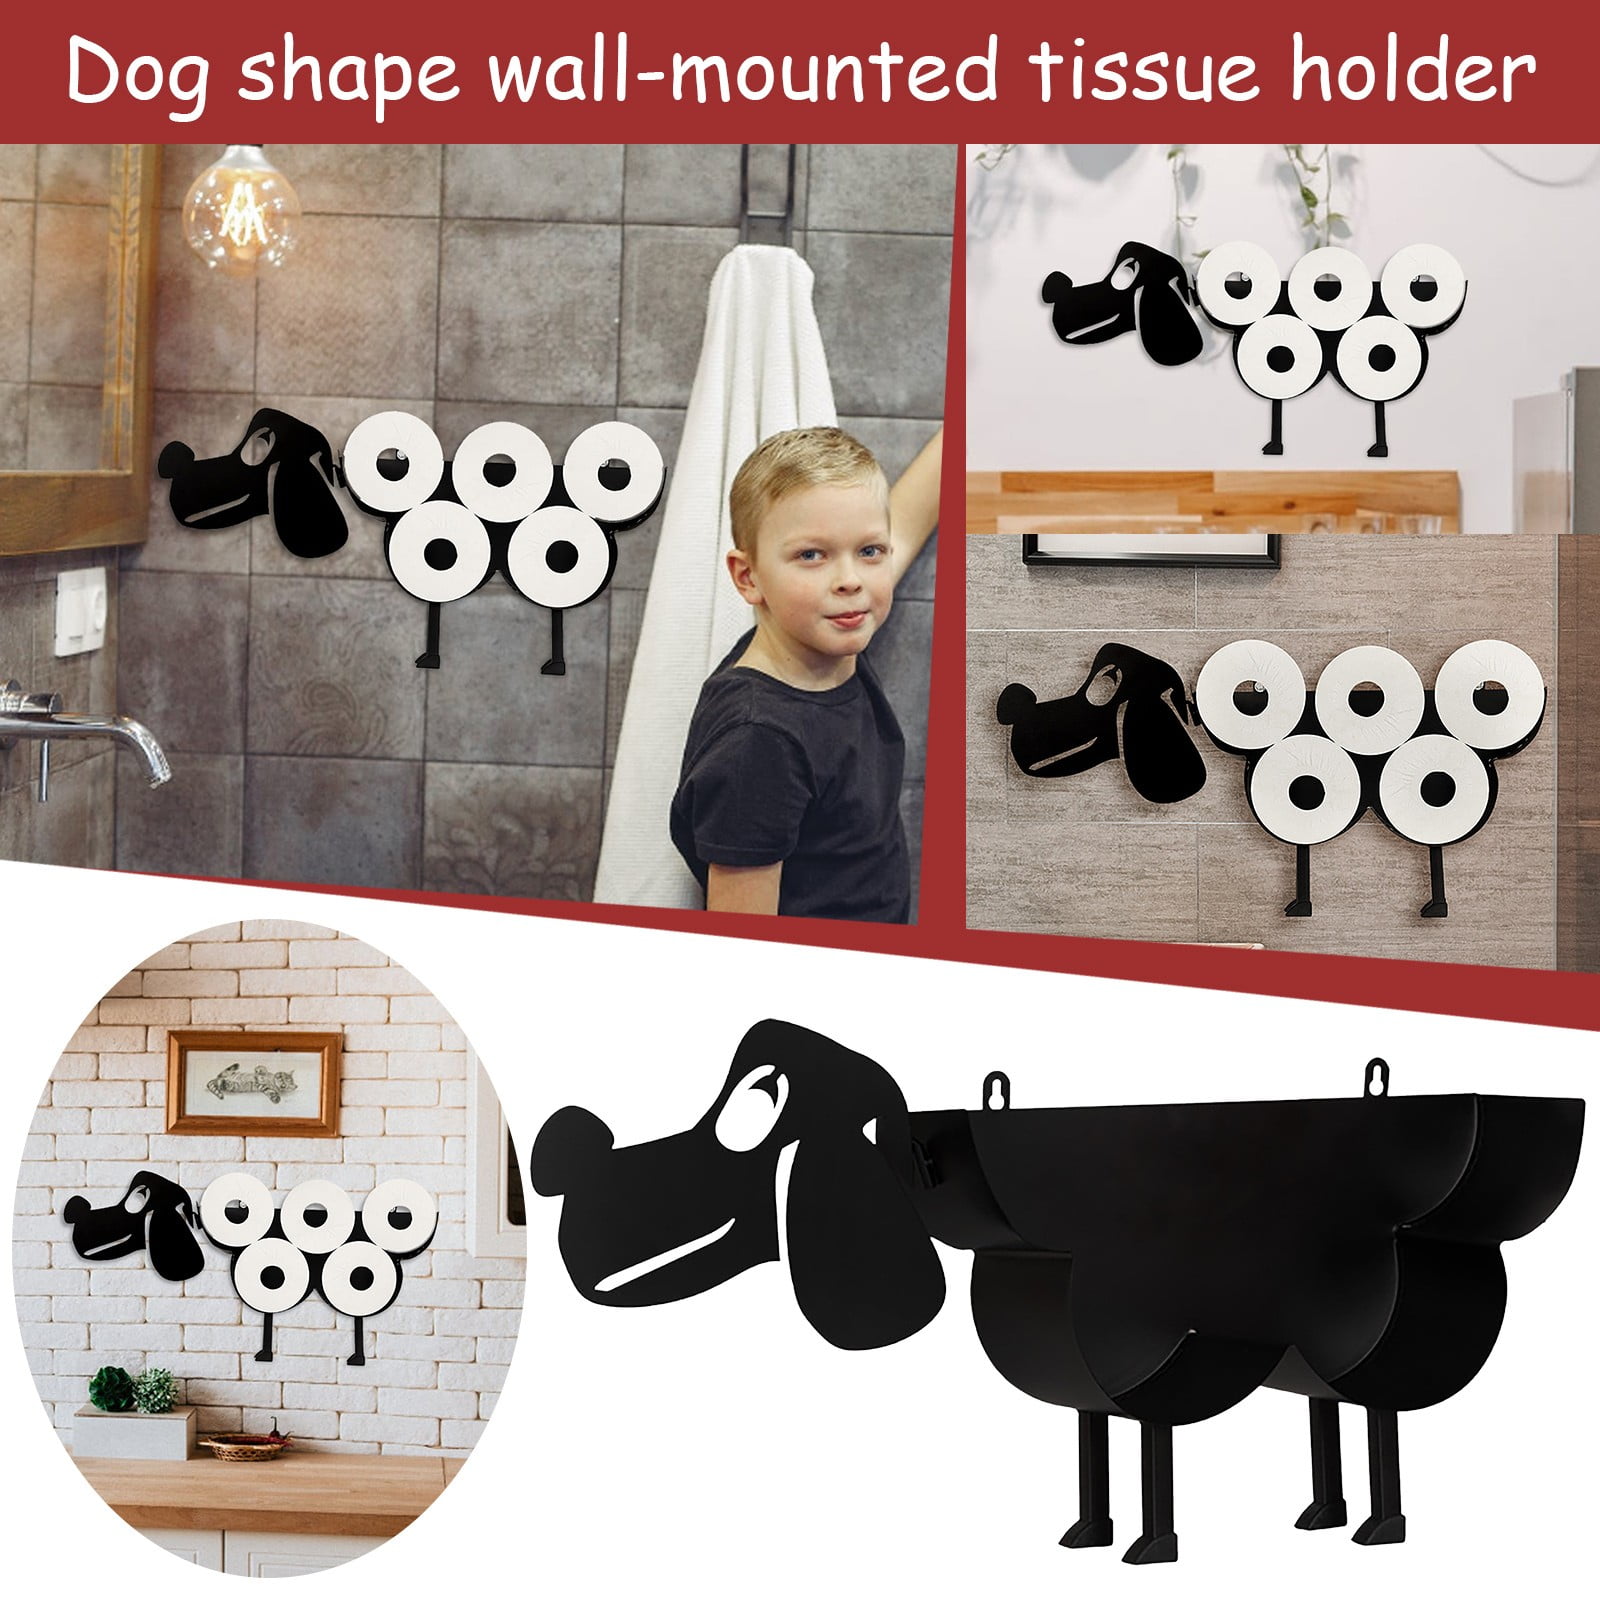 Details about   3PCS Creative Metal Wall-mounted Free-standing Bathroom Tissue Storage Portable